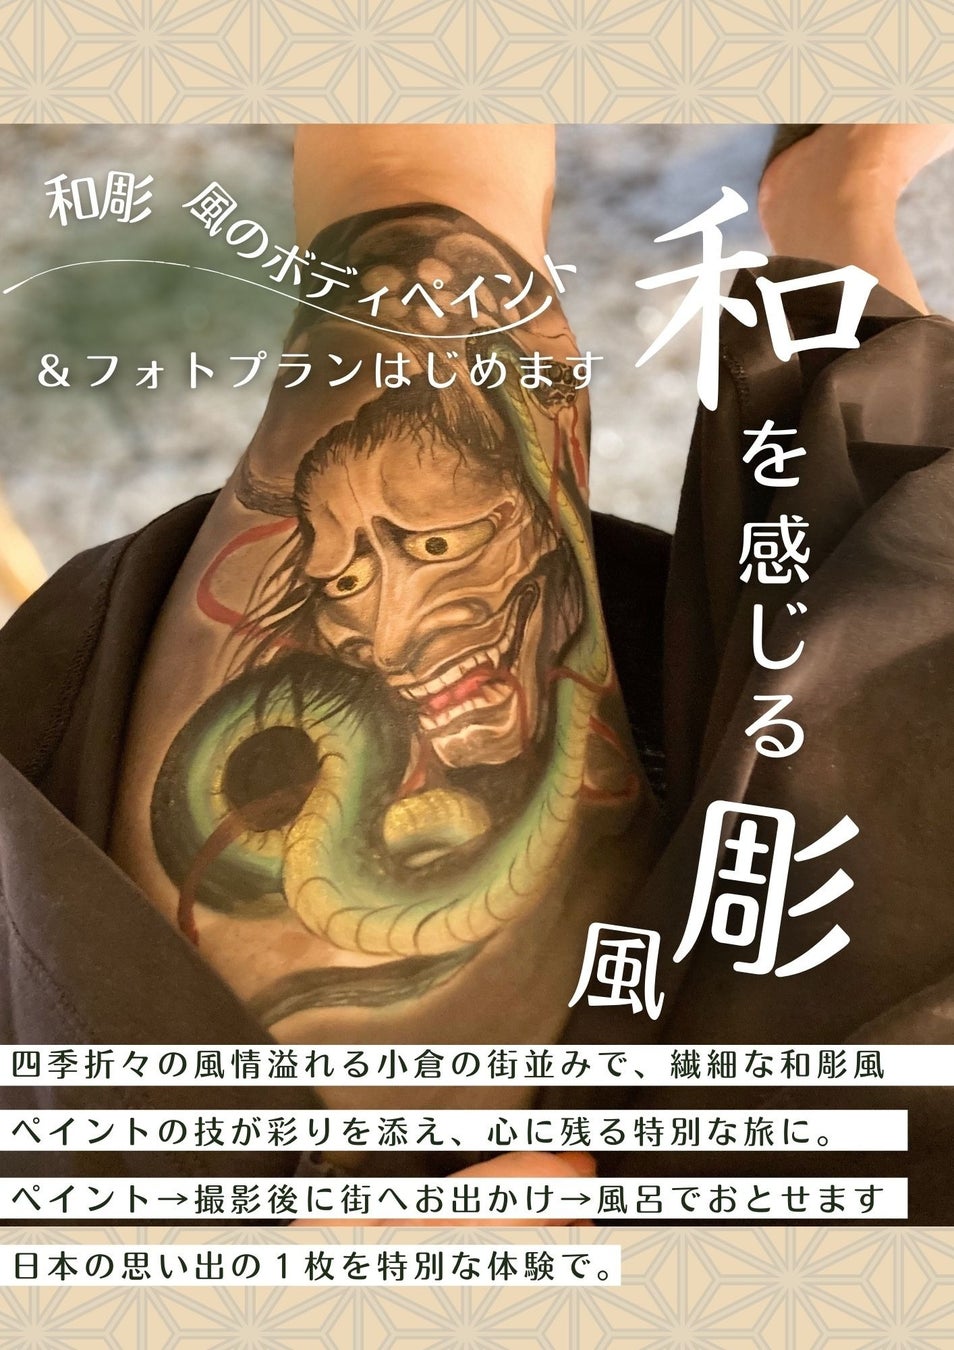 “Immortalize the Art of Japanese Tattoos for a Day”